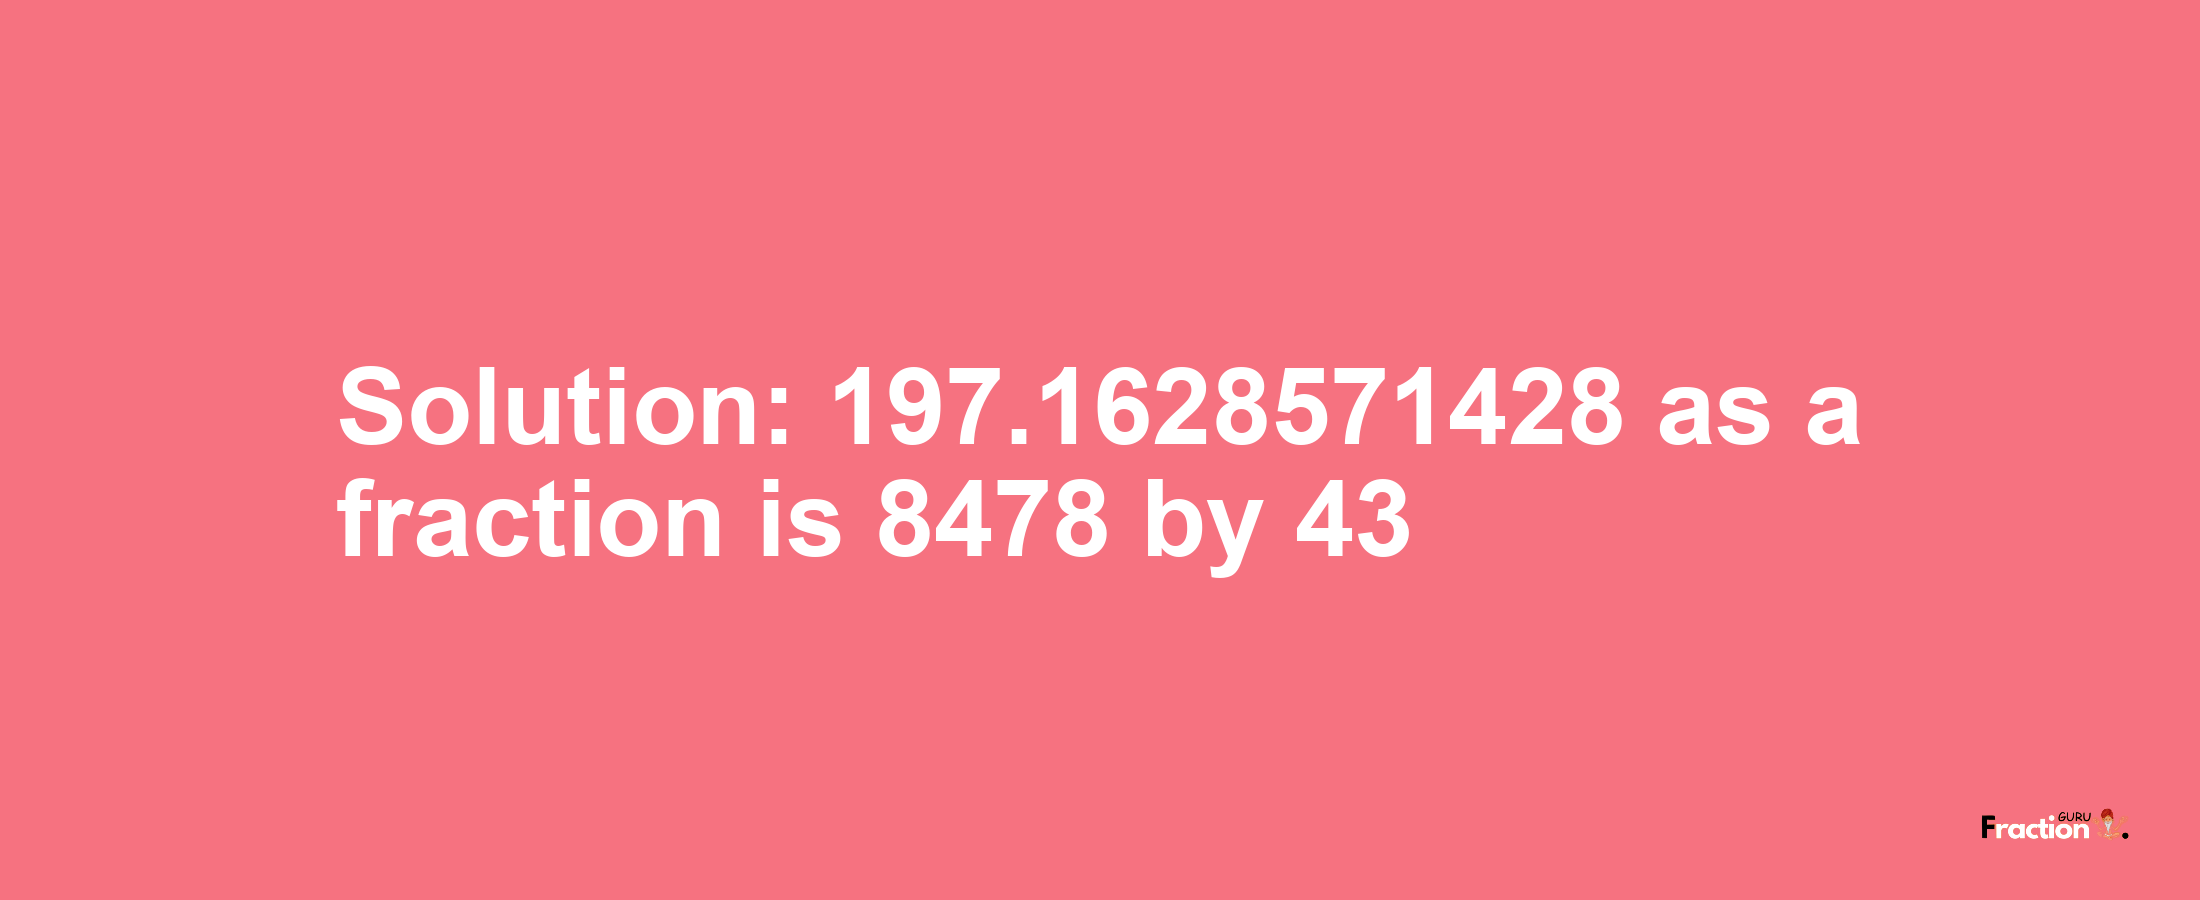 Solution:197.1628571428 as a fraction is 8478/43